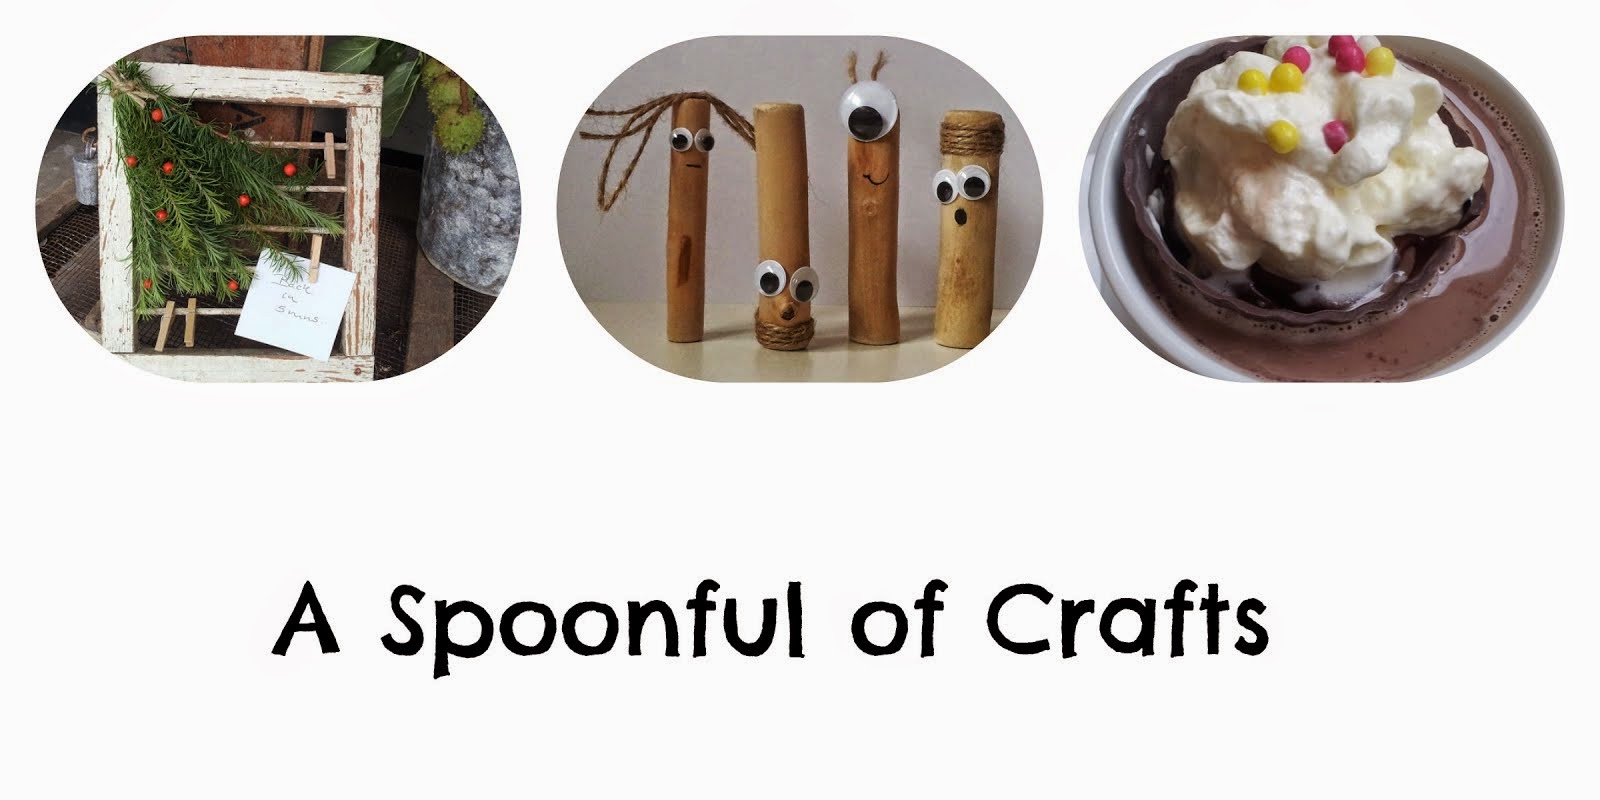 A Spoonful of Crafts